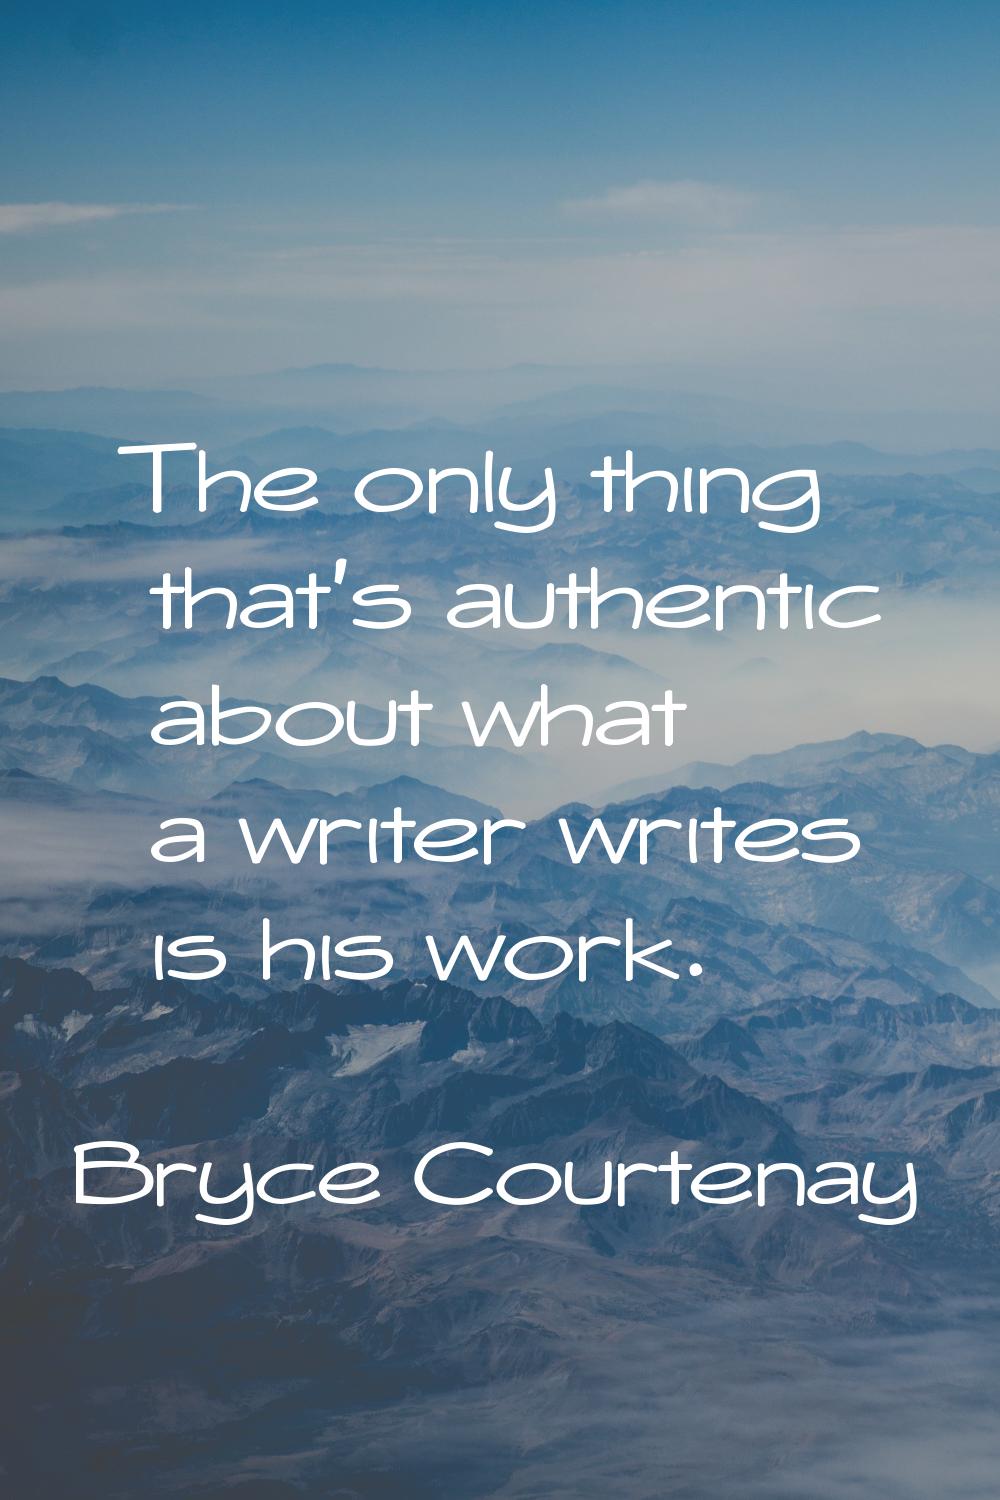 The only thing that's authentic about what a writer writes is his work.